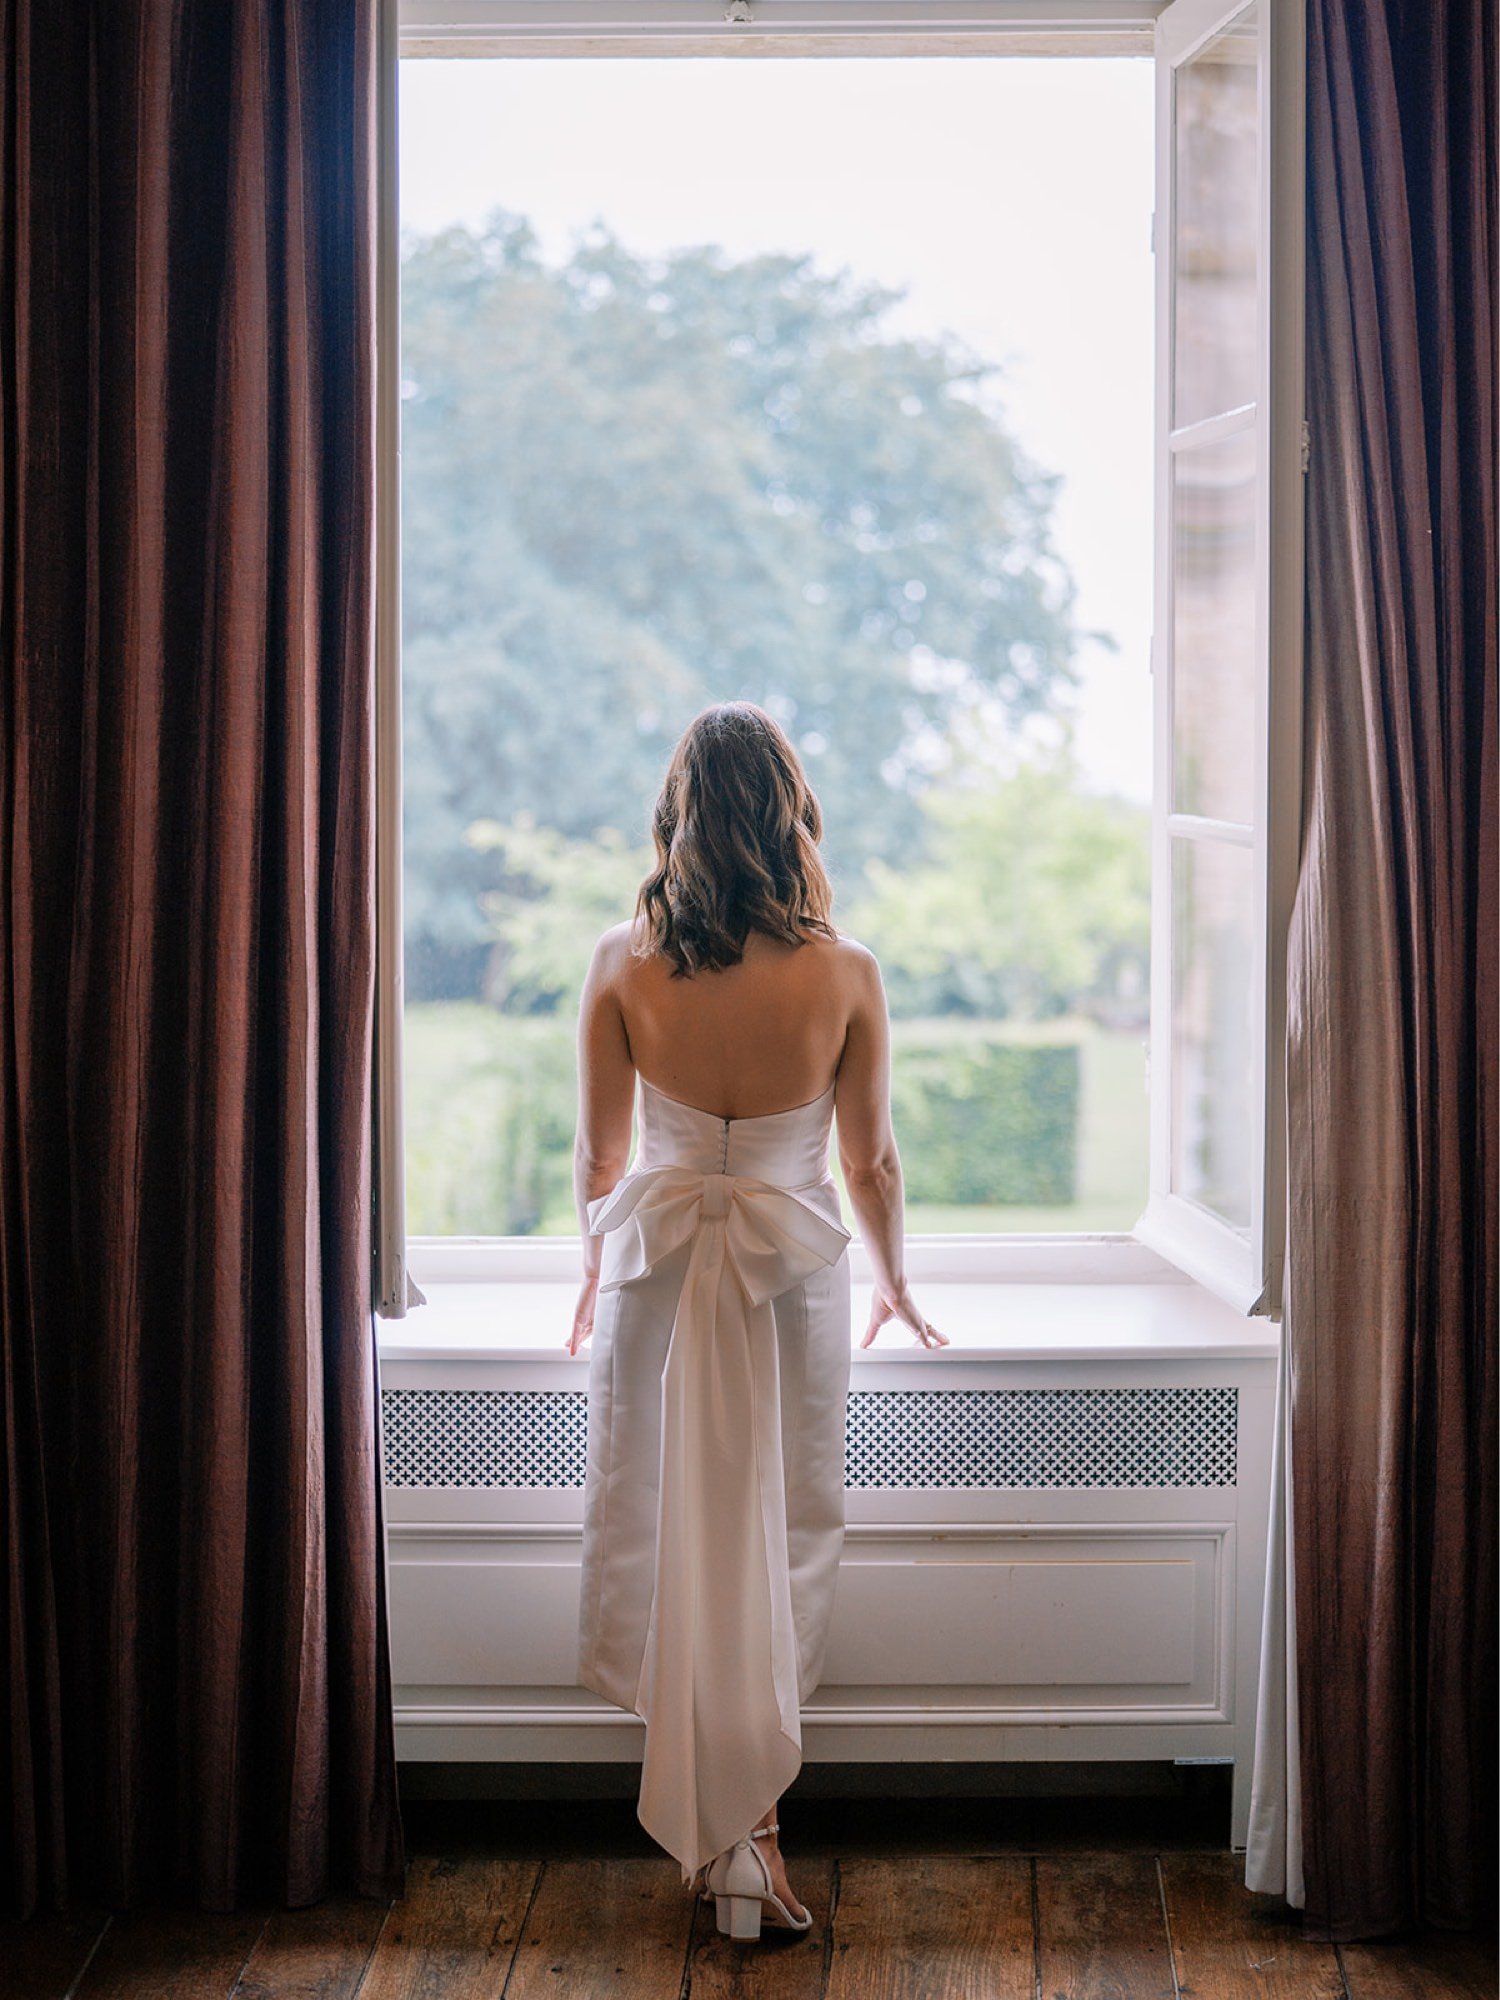 038_Intimate French chateau wedding at Chateau de Redon by top luxury destination photographer Ryan Flynn.jpg